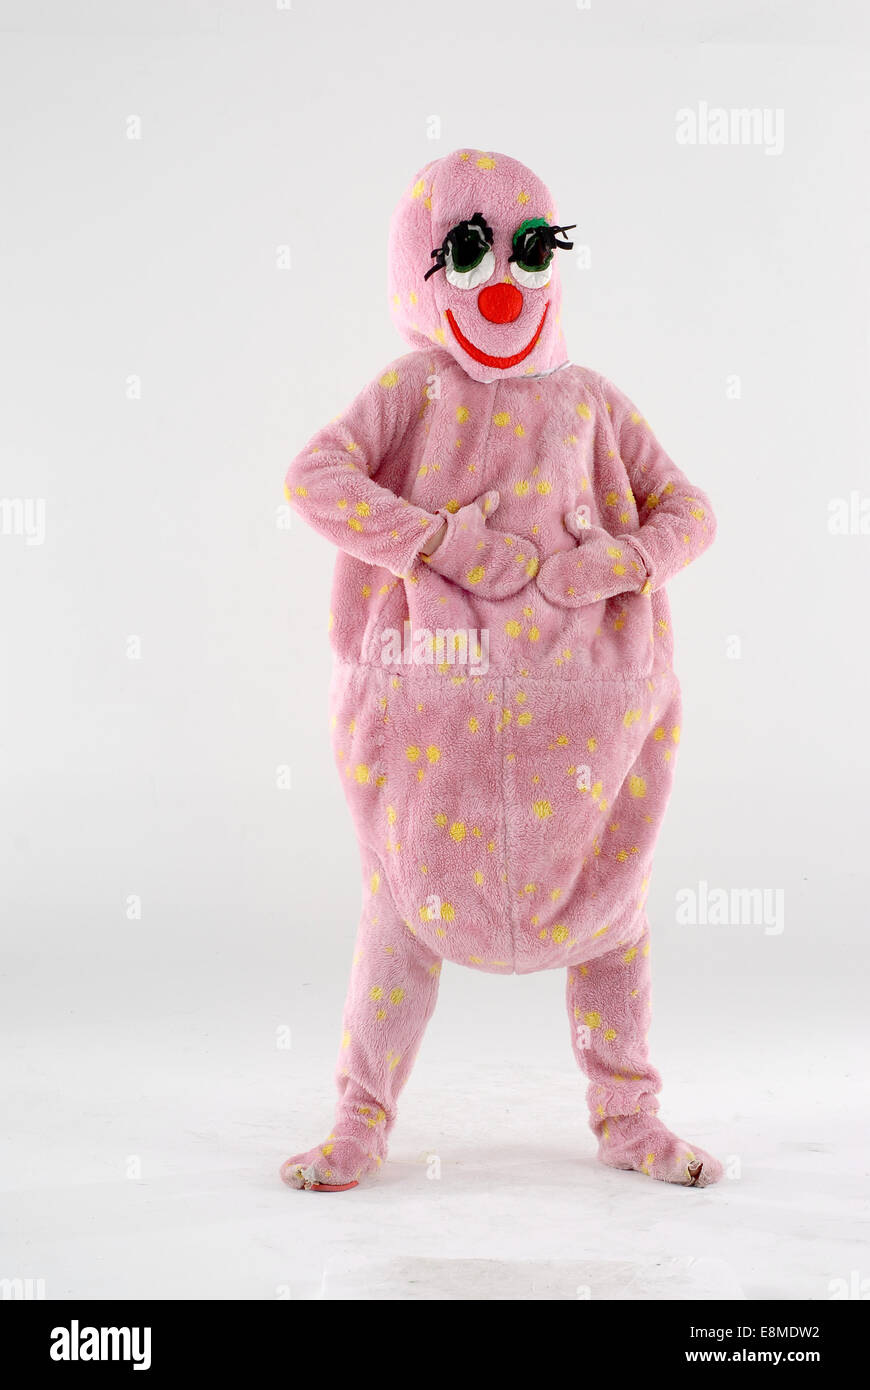 man in fancy dress comedy costume as the character Mr Blobby from Noels  House Party from the TV show Stock Photo - Alamy